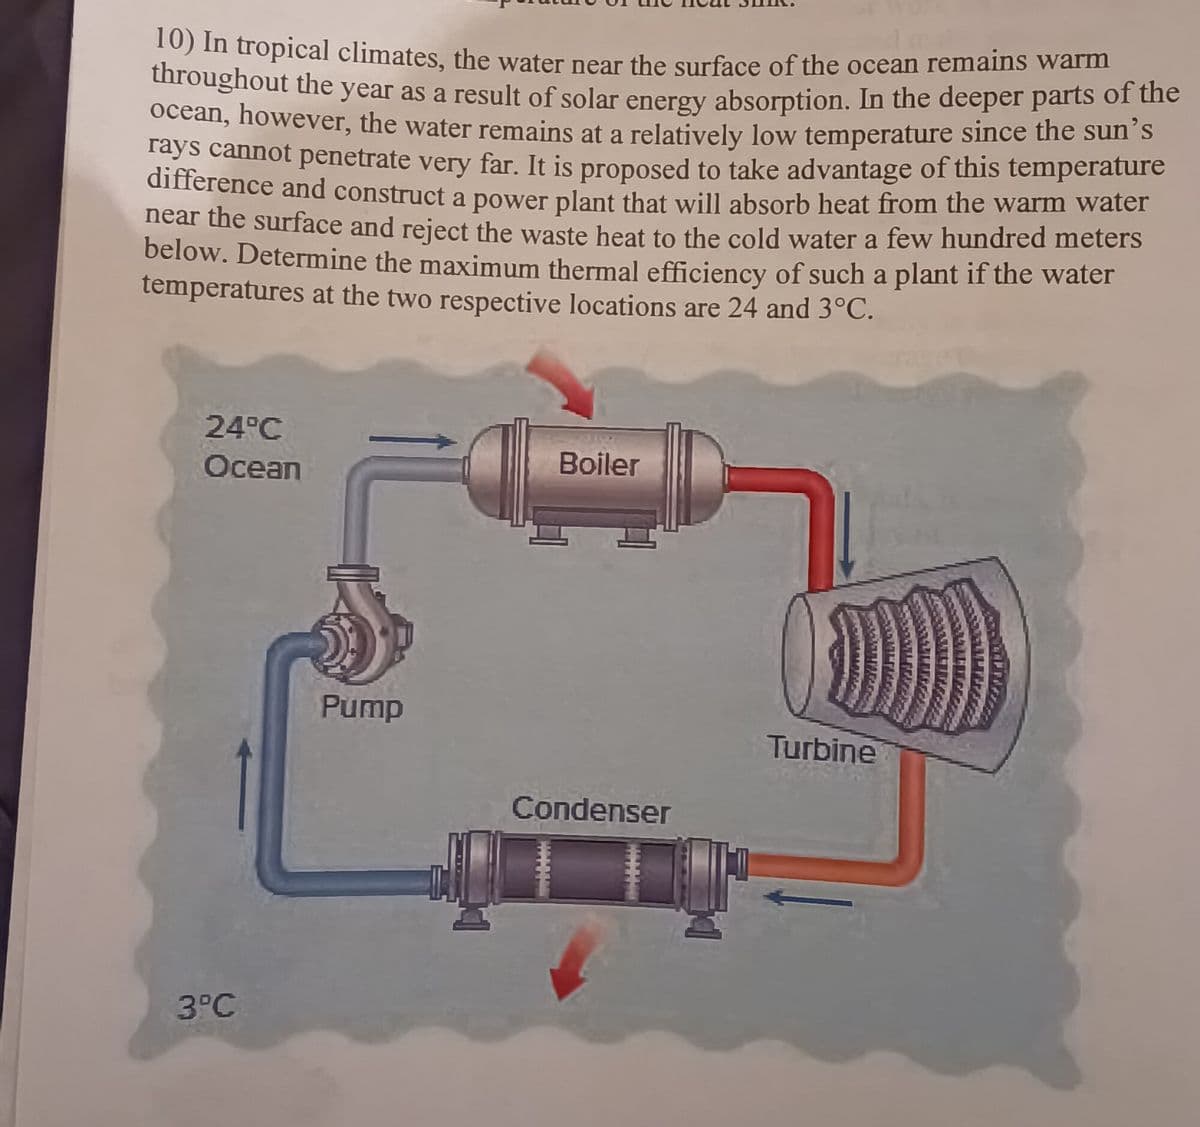 10) In tropical climates, the water near the surface of the ocean remains warm
throughout the year as a result of solar energy absorption. In the deeper parts of the
ocean, however, the water remains at a relatively low temperature since the sun's
rays cannot penetrate very far. It is proposed to take advantage of this temperature
difference and construct a power plant that will absorb heat from the warm water
near the surface and reject the waste heat to the cold water a few hundred meters
below. Determine the maximum thermal efficiency of such a plant if the water
temperatures at the two respective locations are 24 and 3°C.
24°C
Ocean
3°C
Pump
Boiler
Condenser
w
Turbine